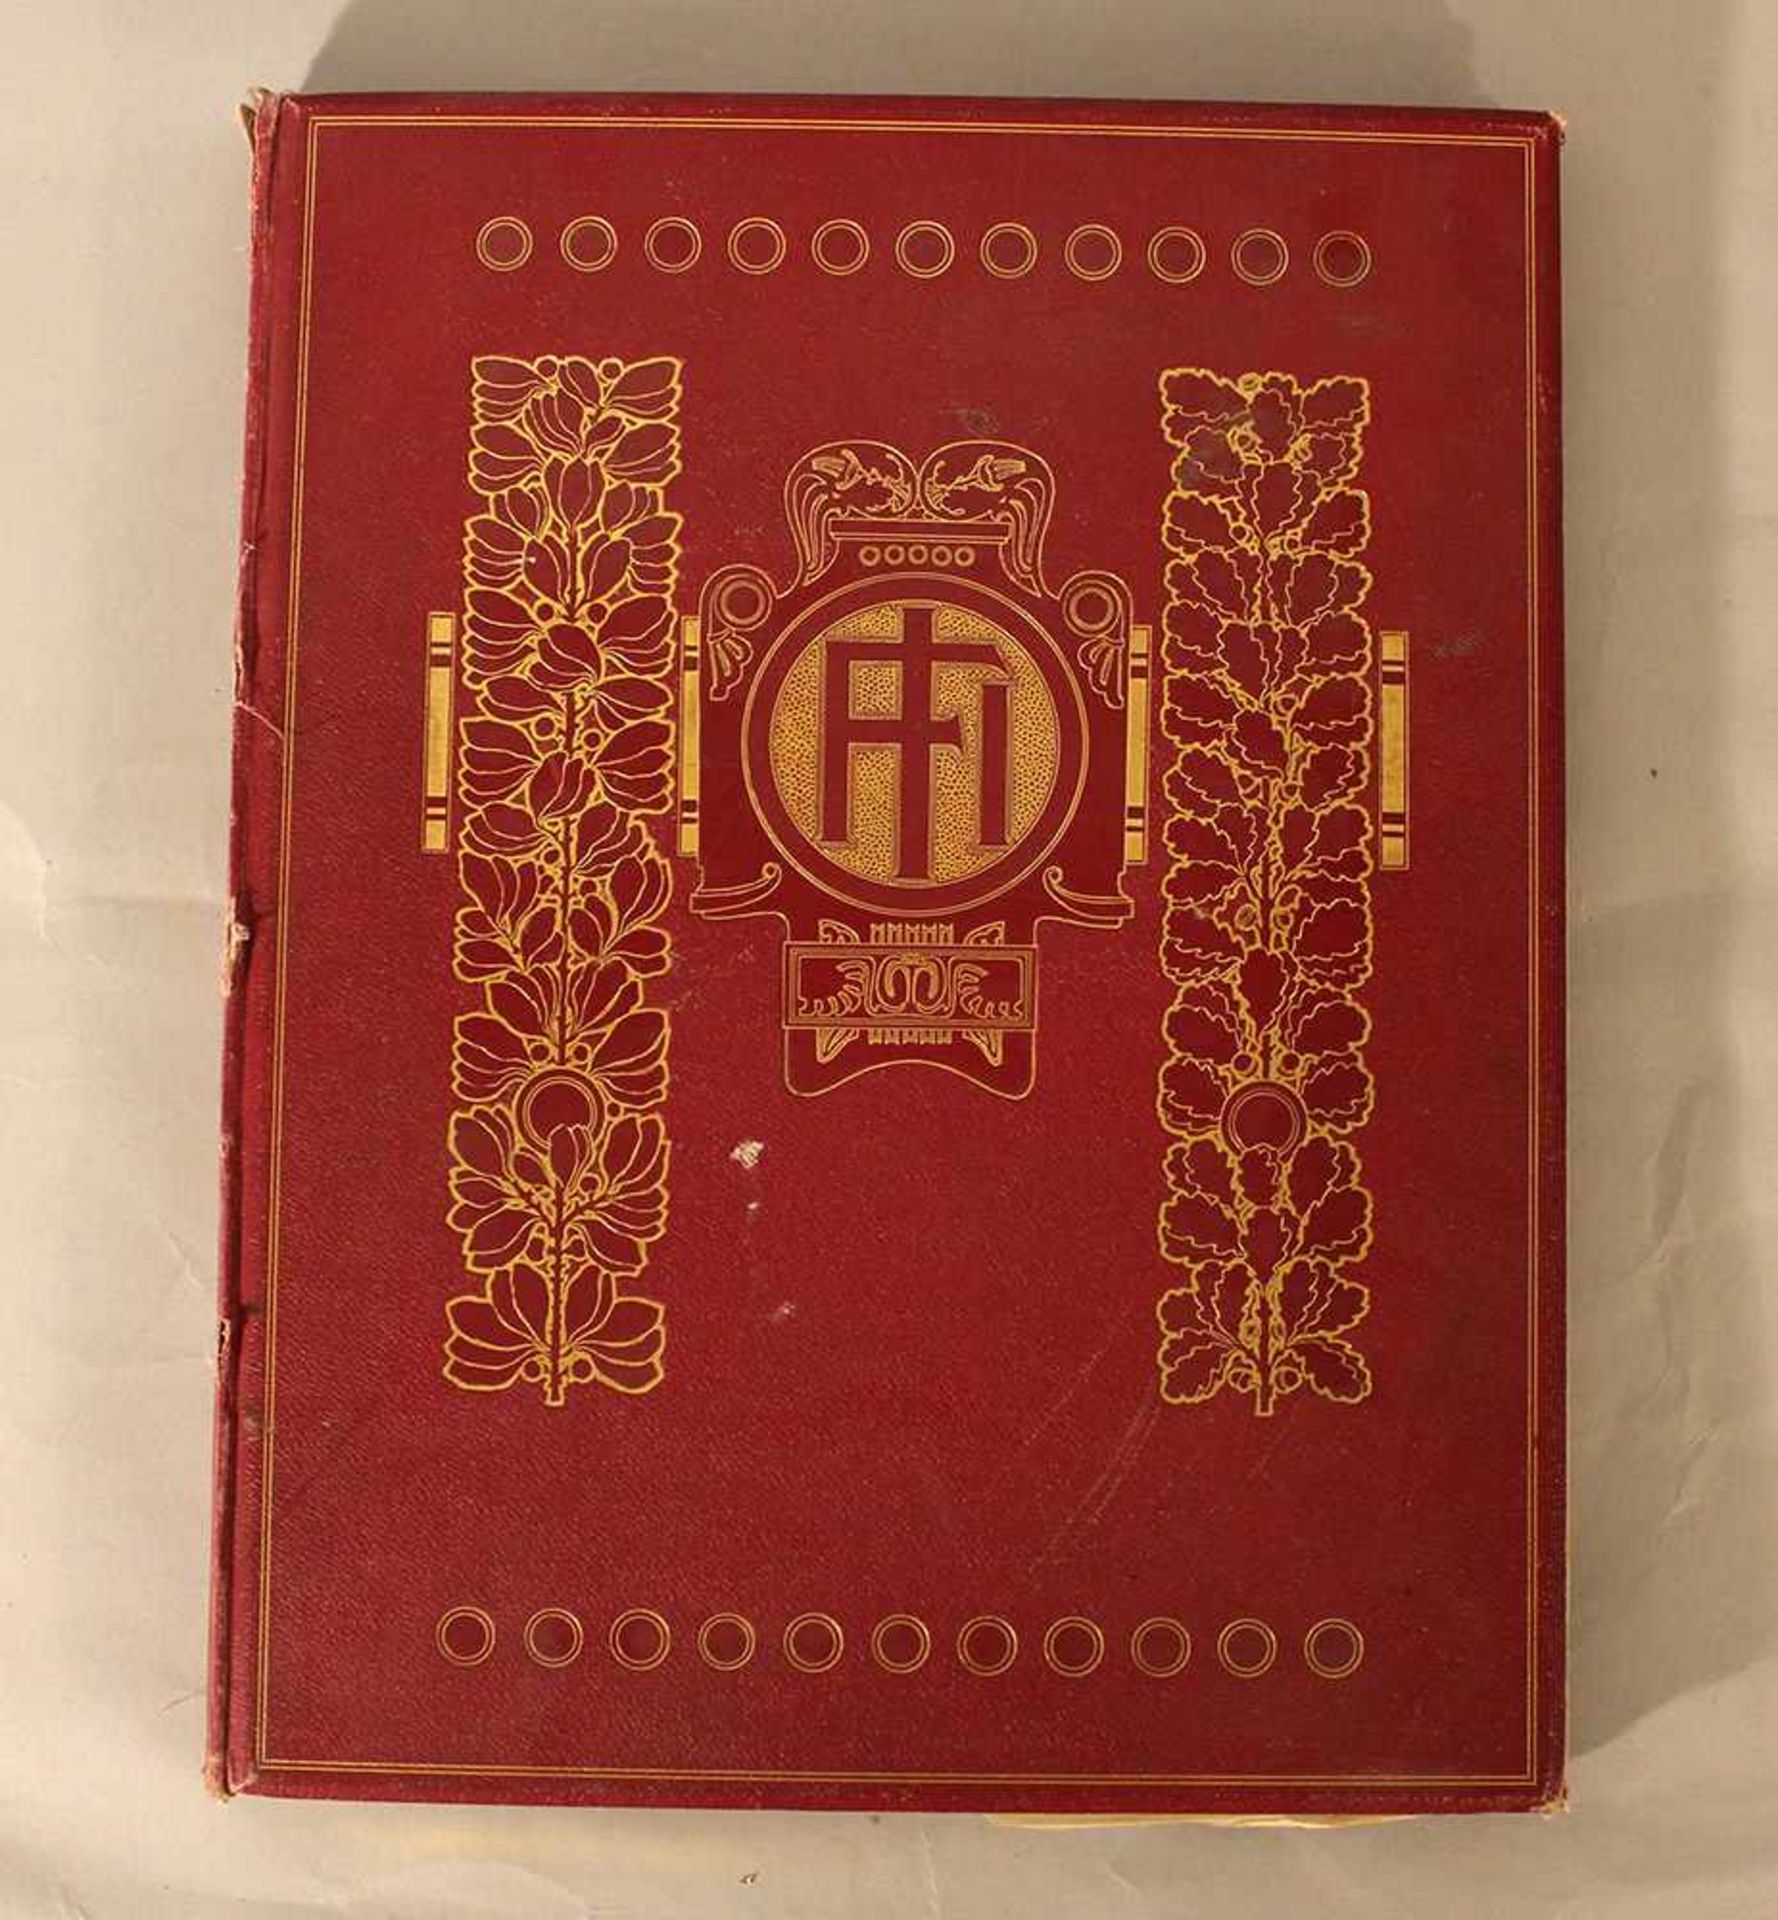 Viribus Unitis, by Max Herzig, with several illustrations, in luxury edition, with red gilded